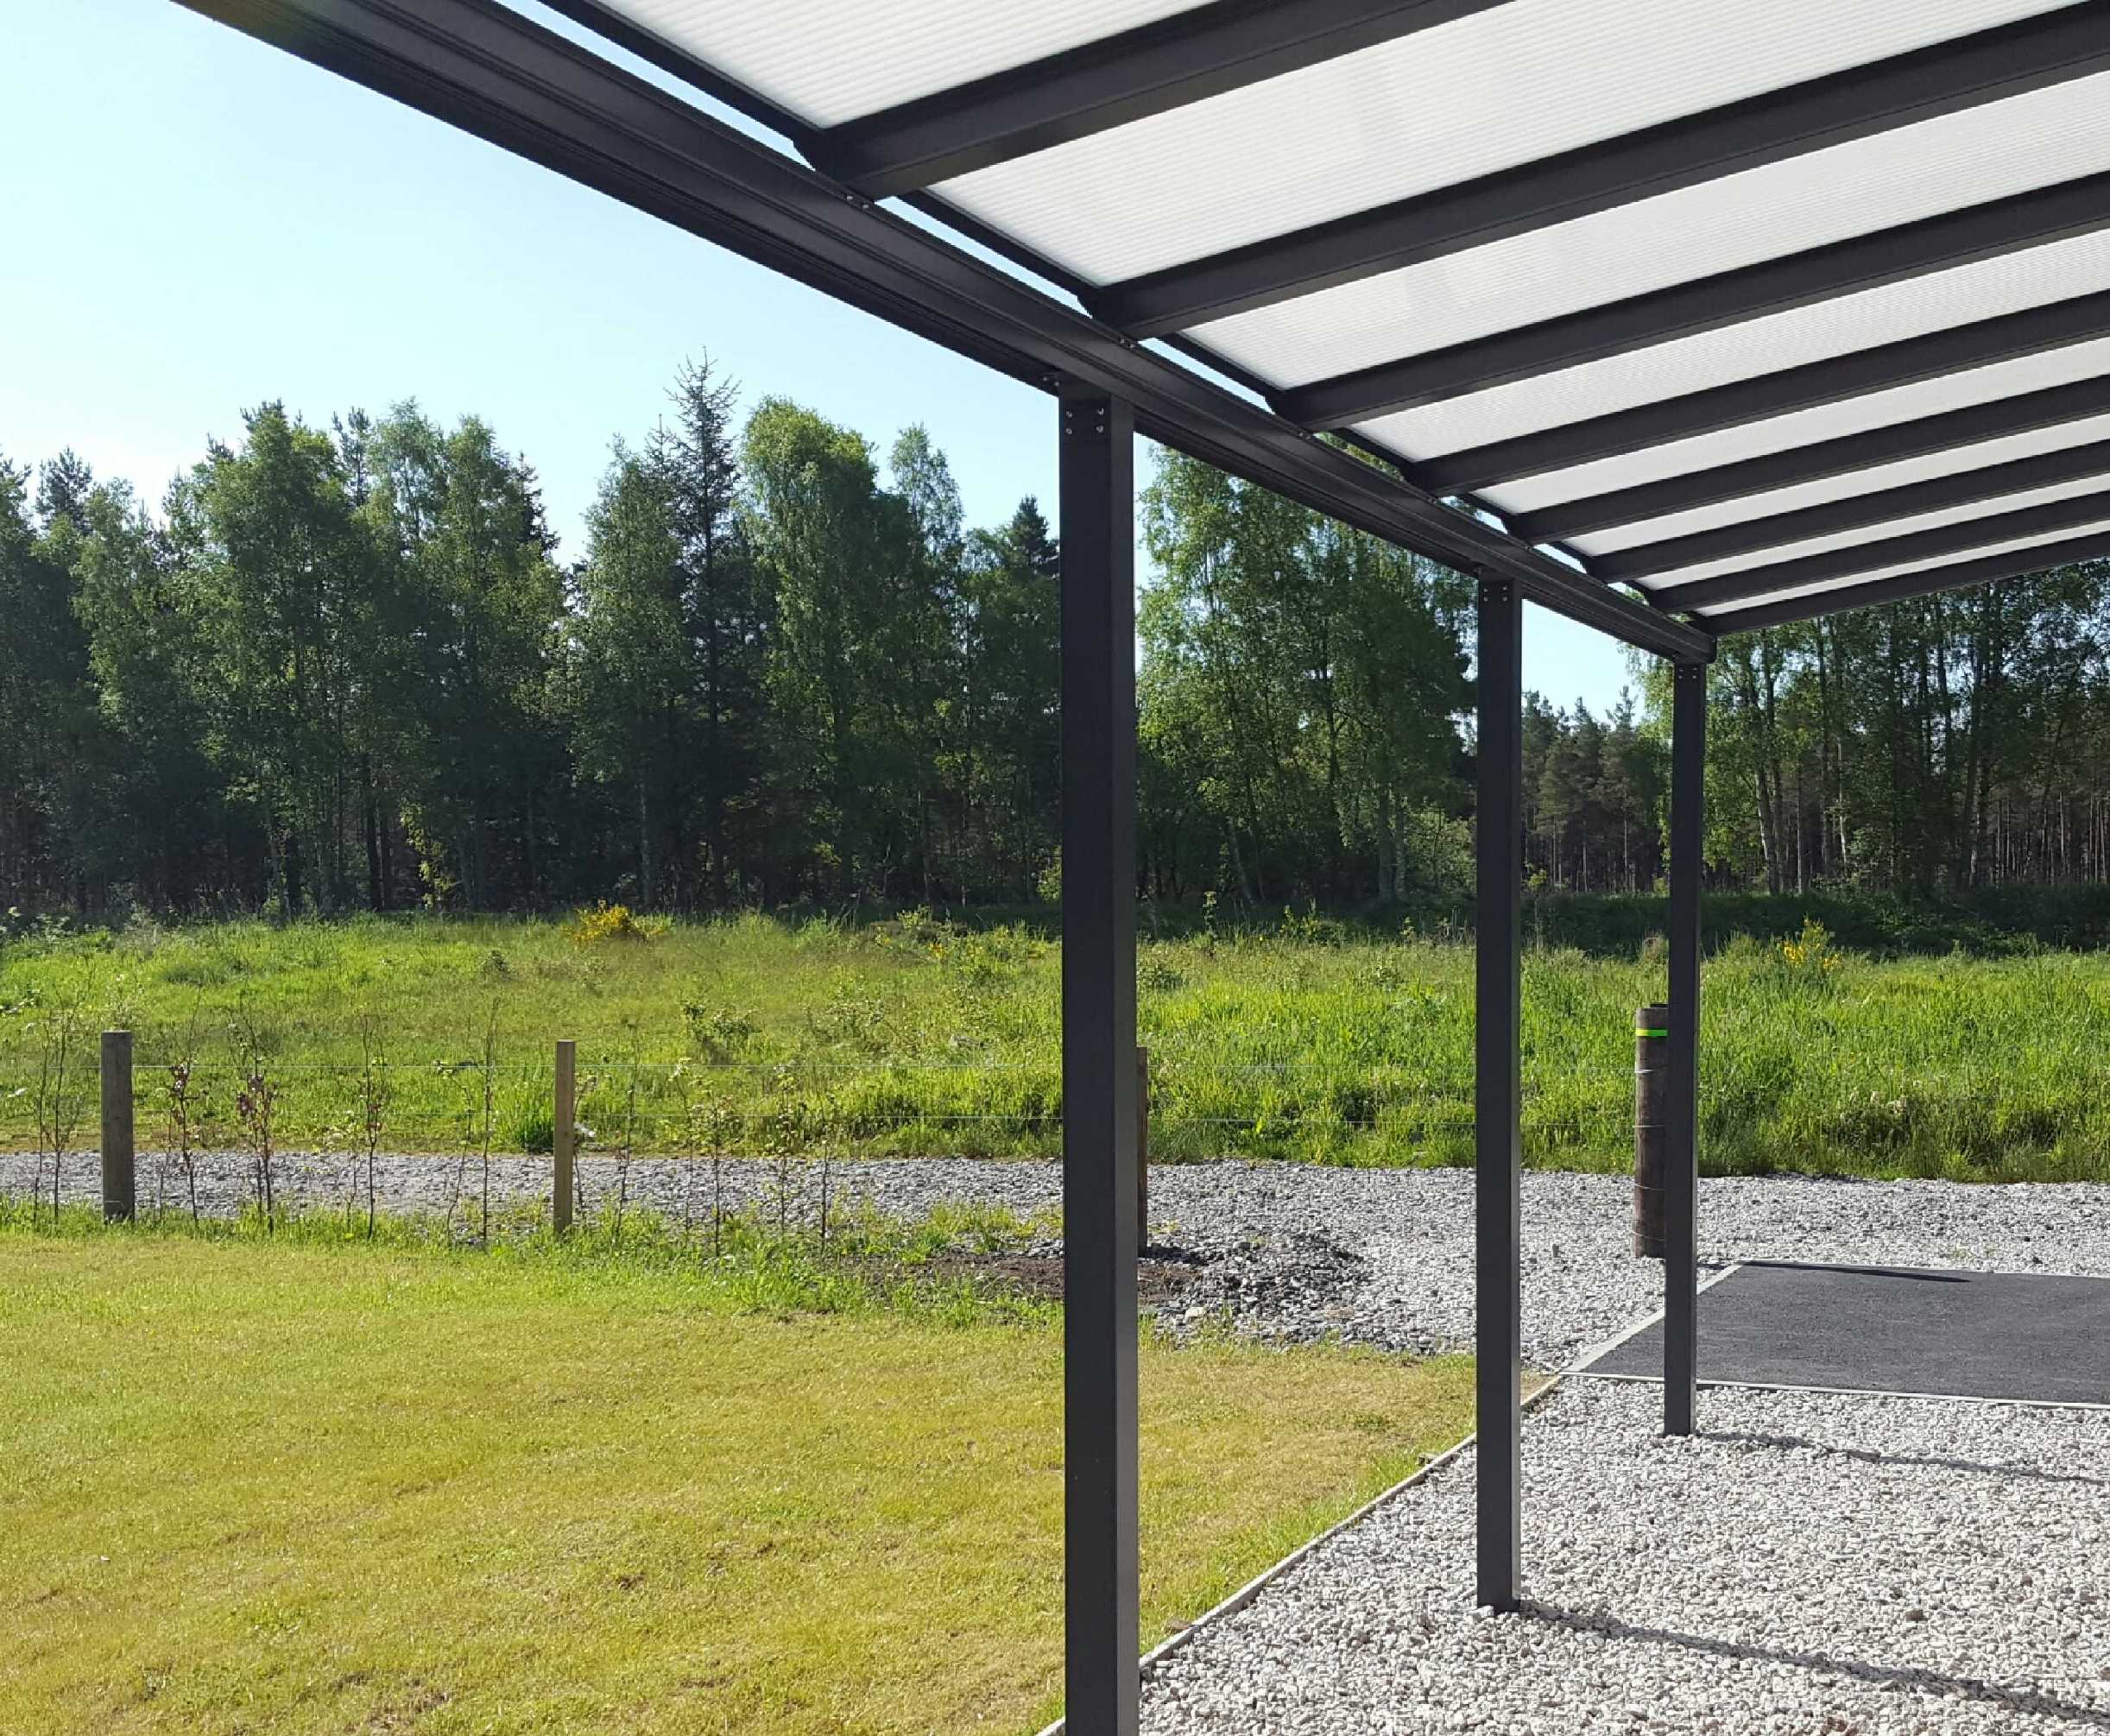 Omega Smart Lean-To Canopy, Anthracite Grey, UNGLAZED for 6mm Glazing - 7.7m (W) x 2.0m (P), (4) Supporting Posts